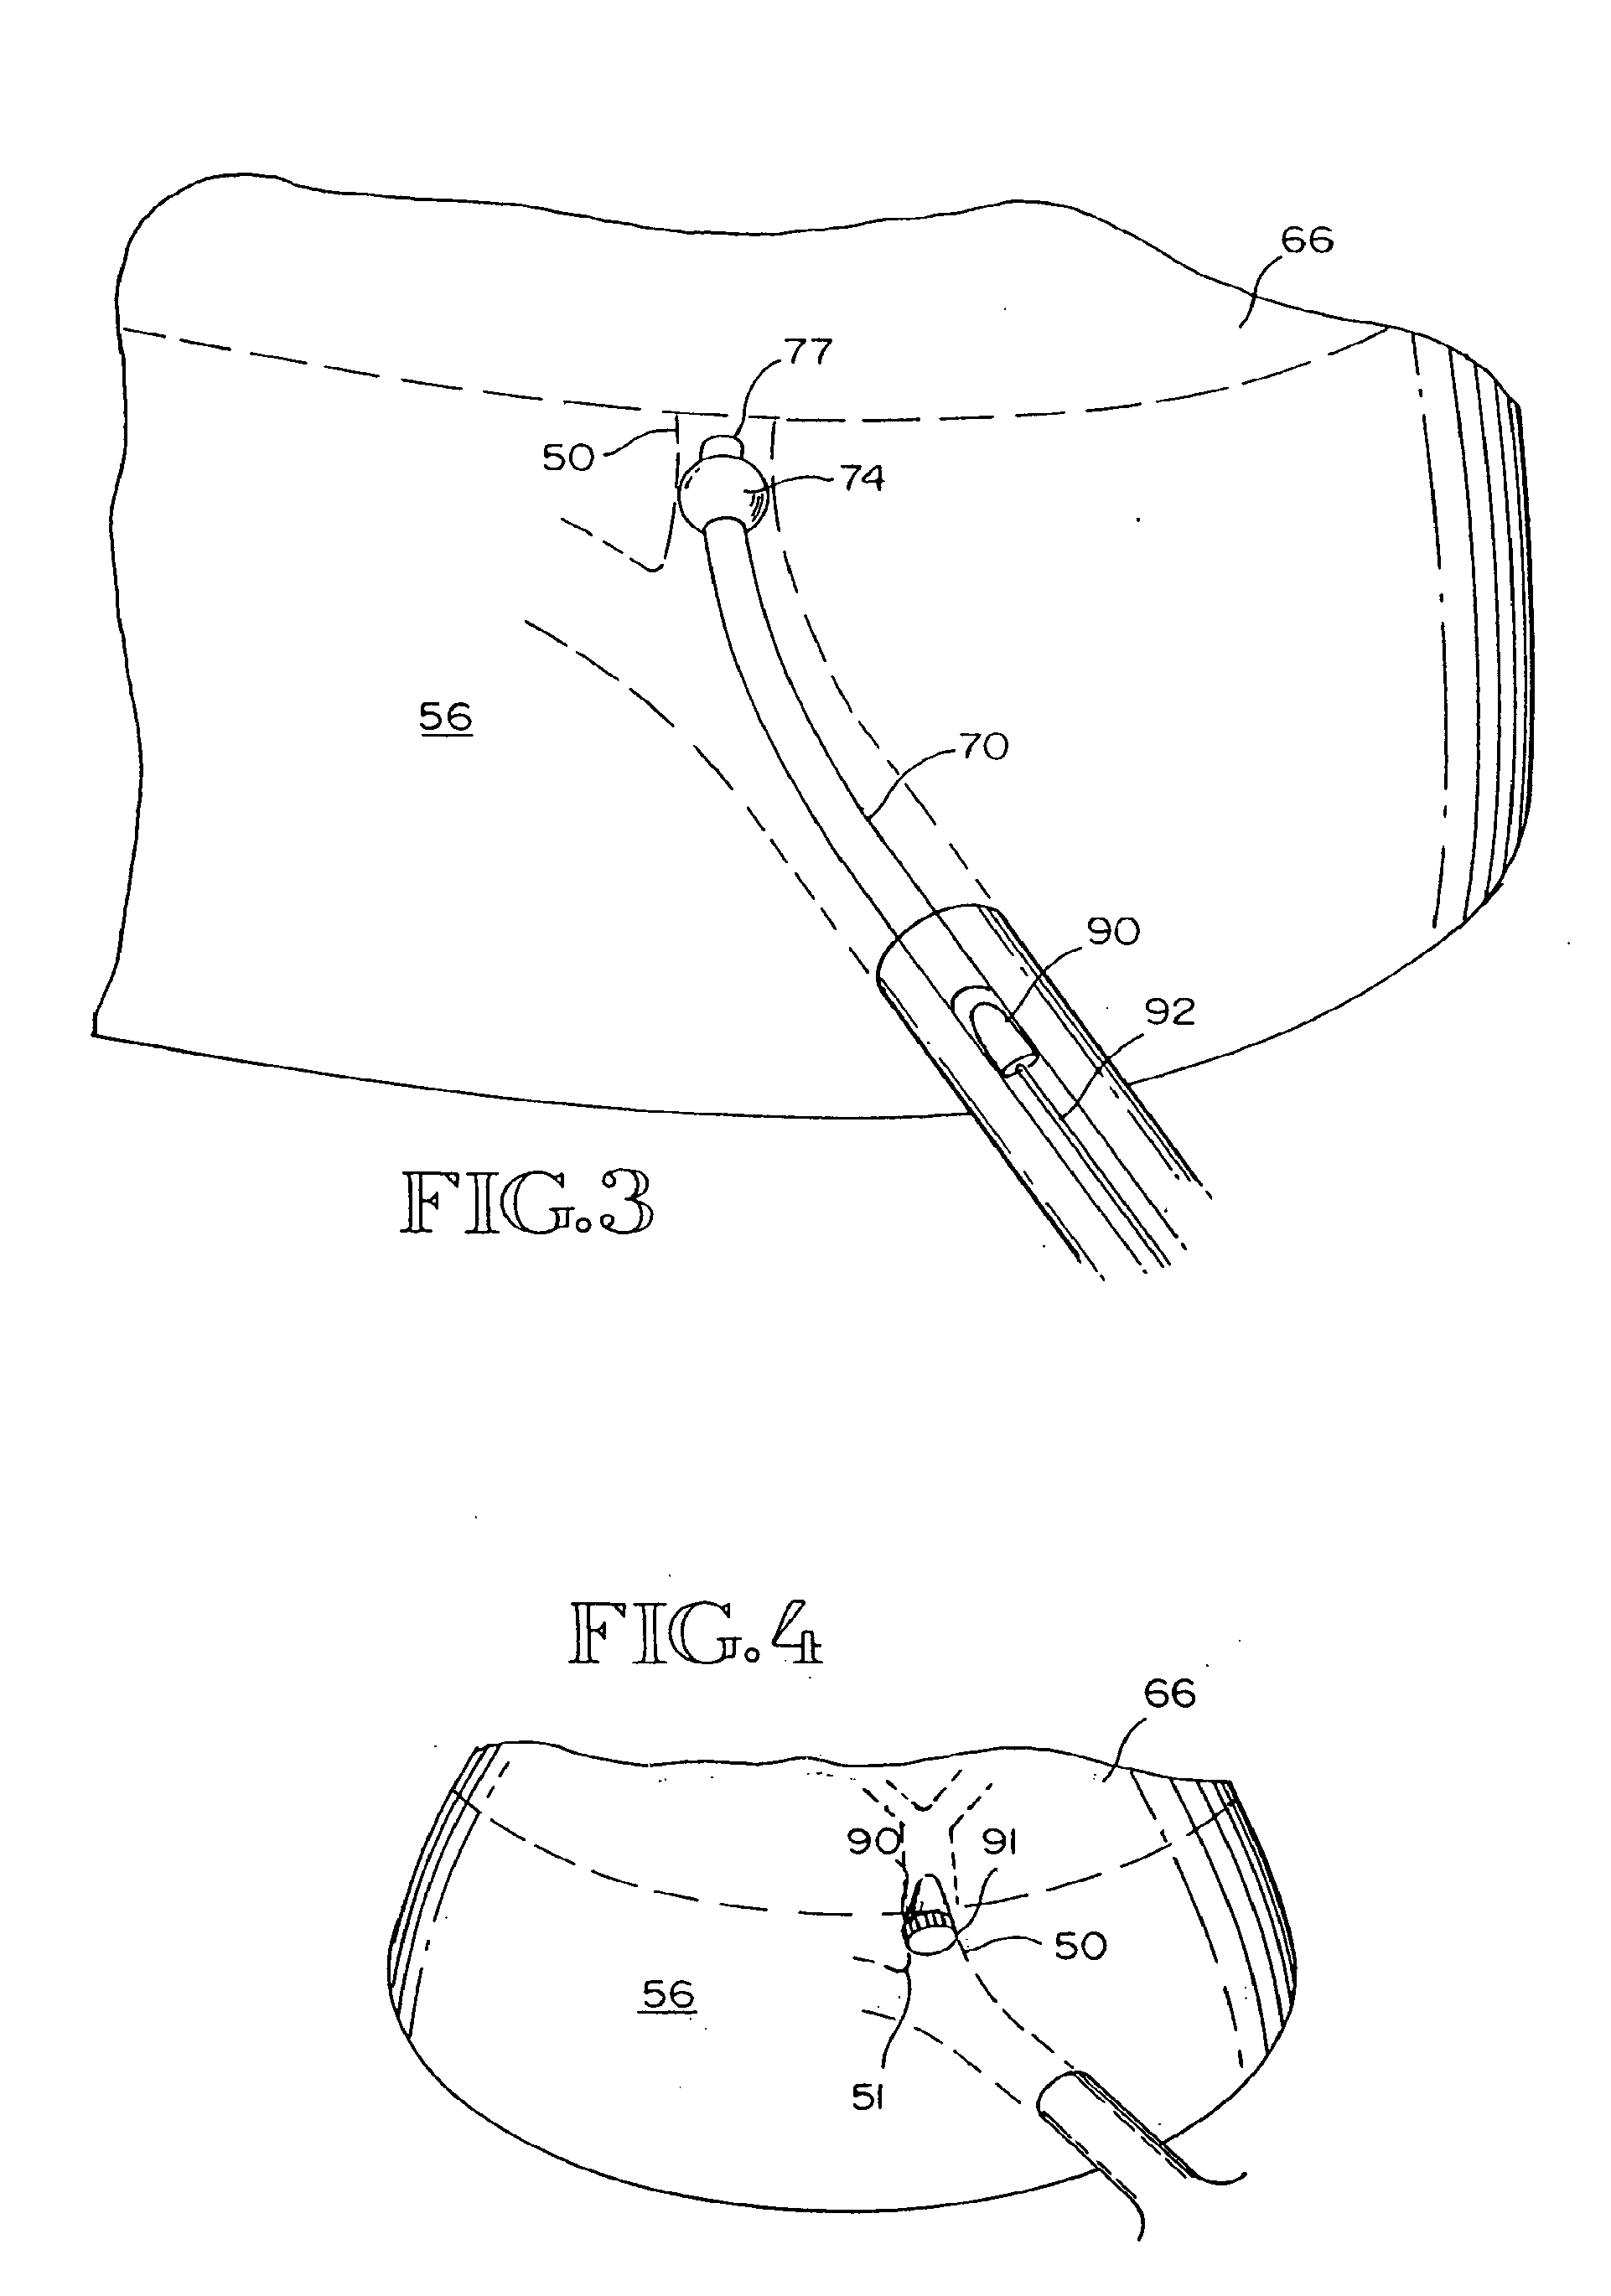 Removable anchored lung volume reduction devices and methods